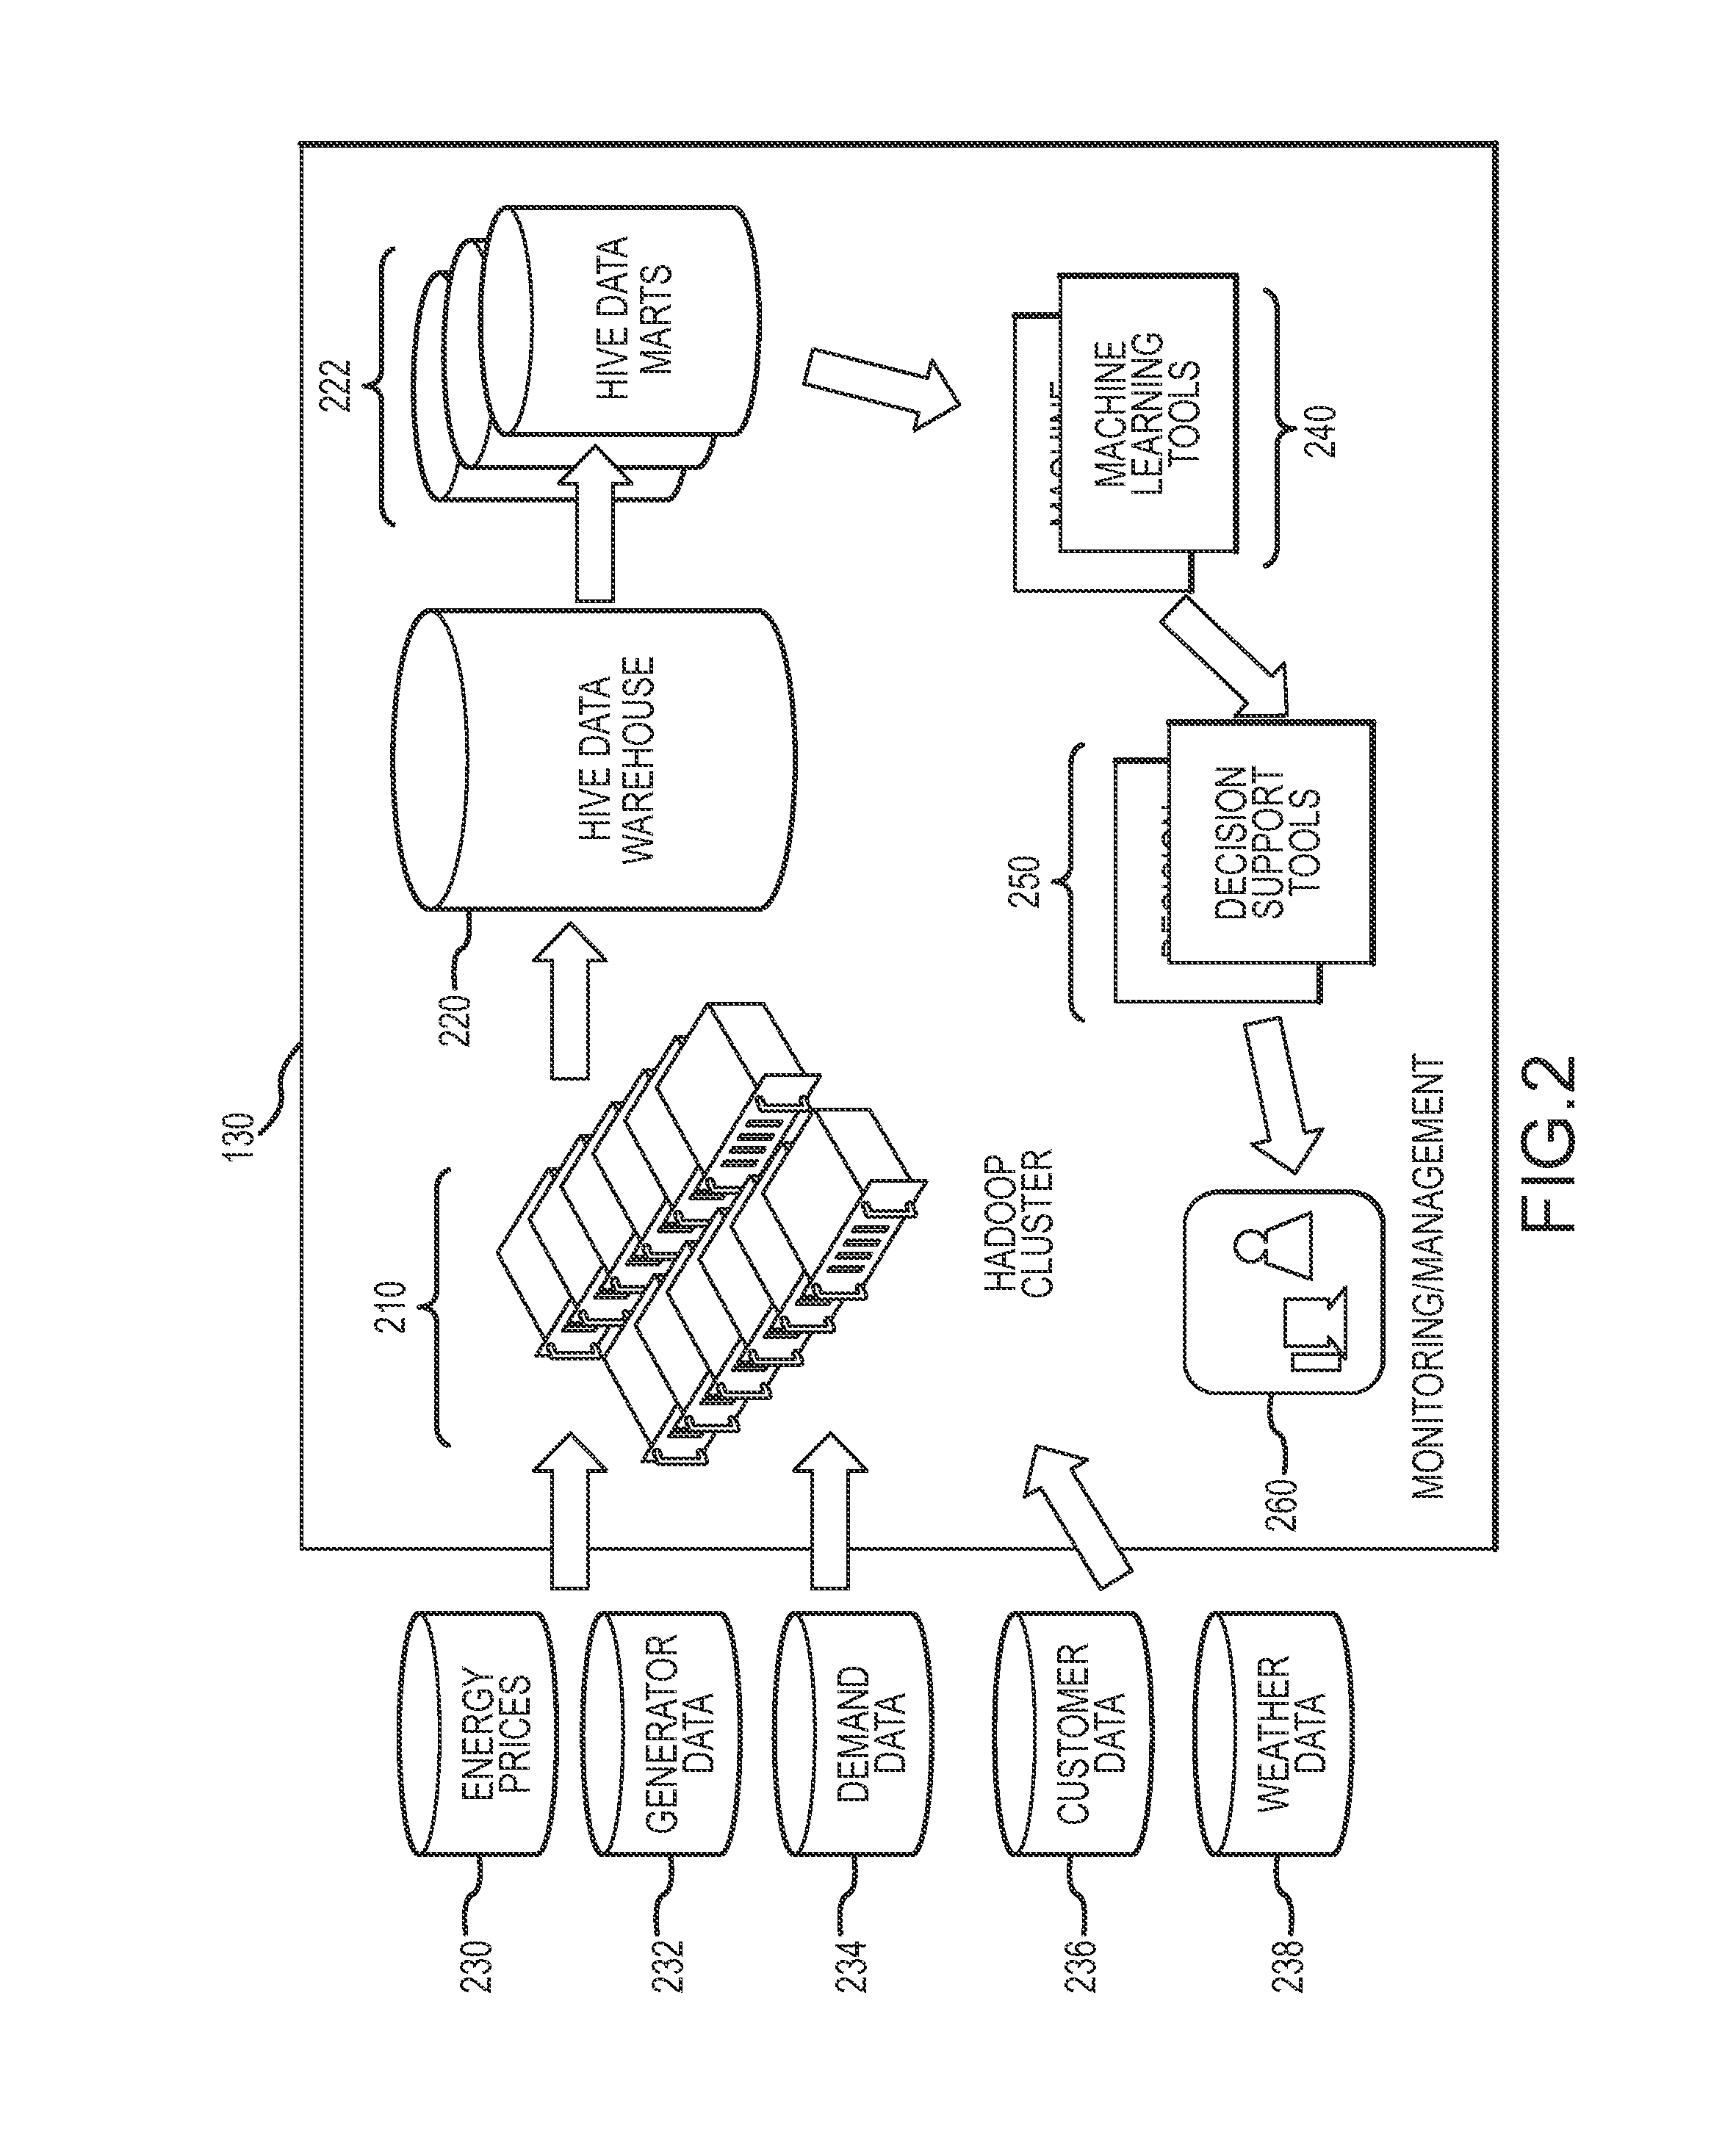 System and method for mathematical predictive analytics and computational energy modeling